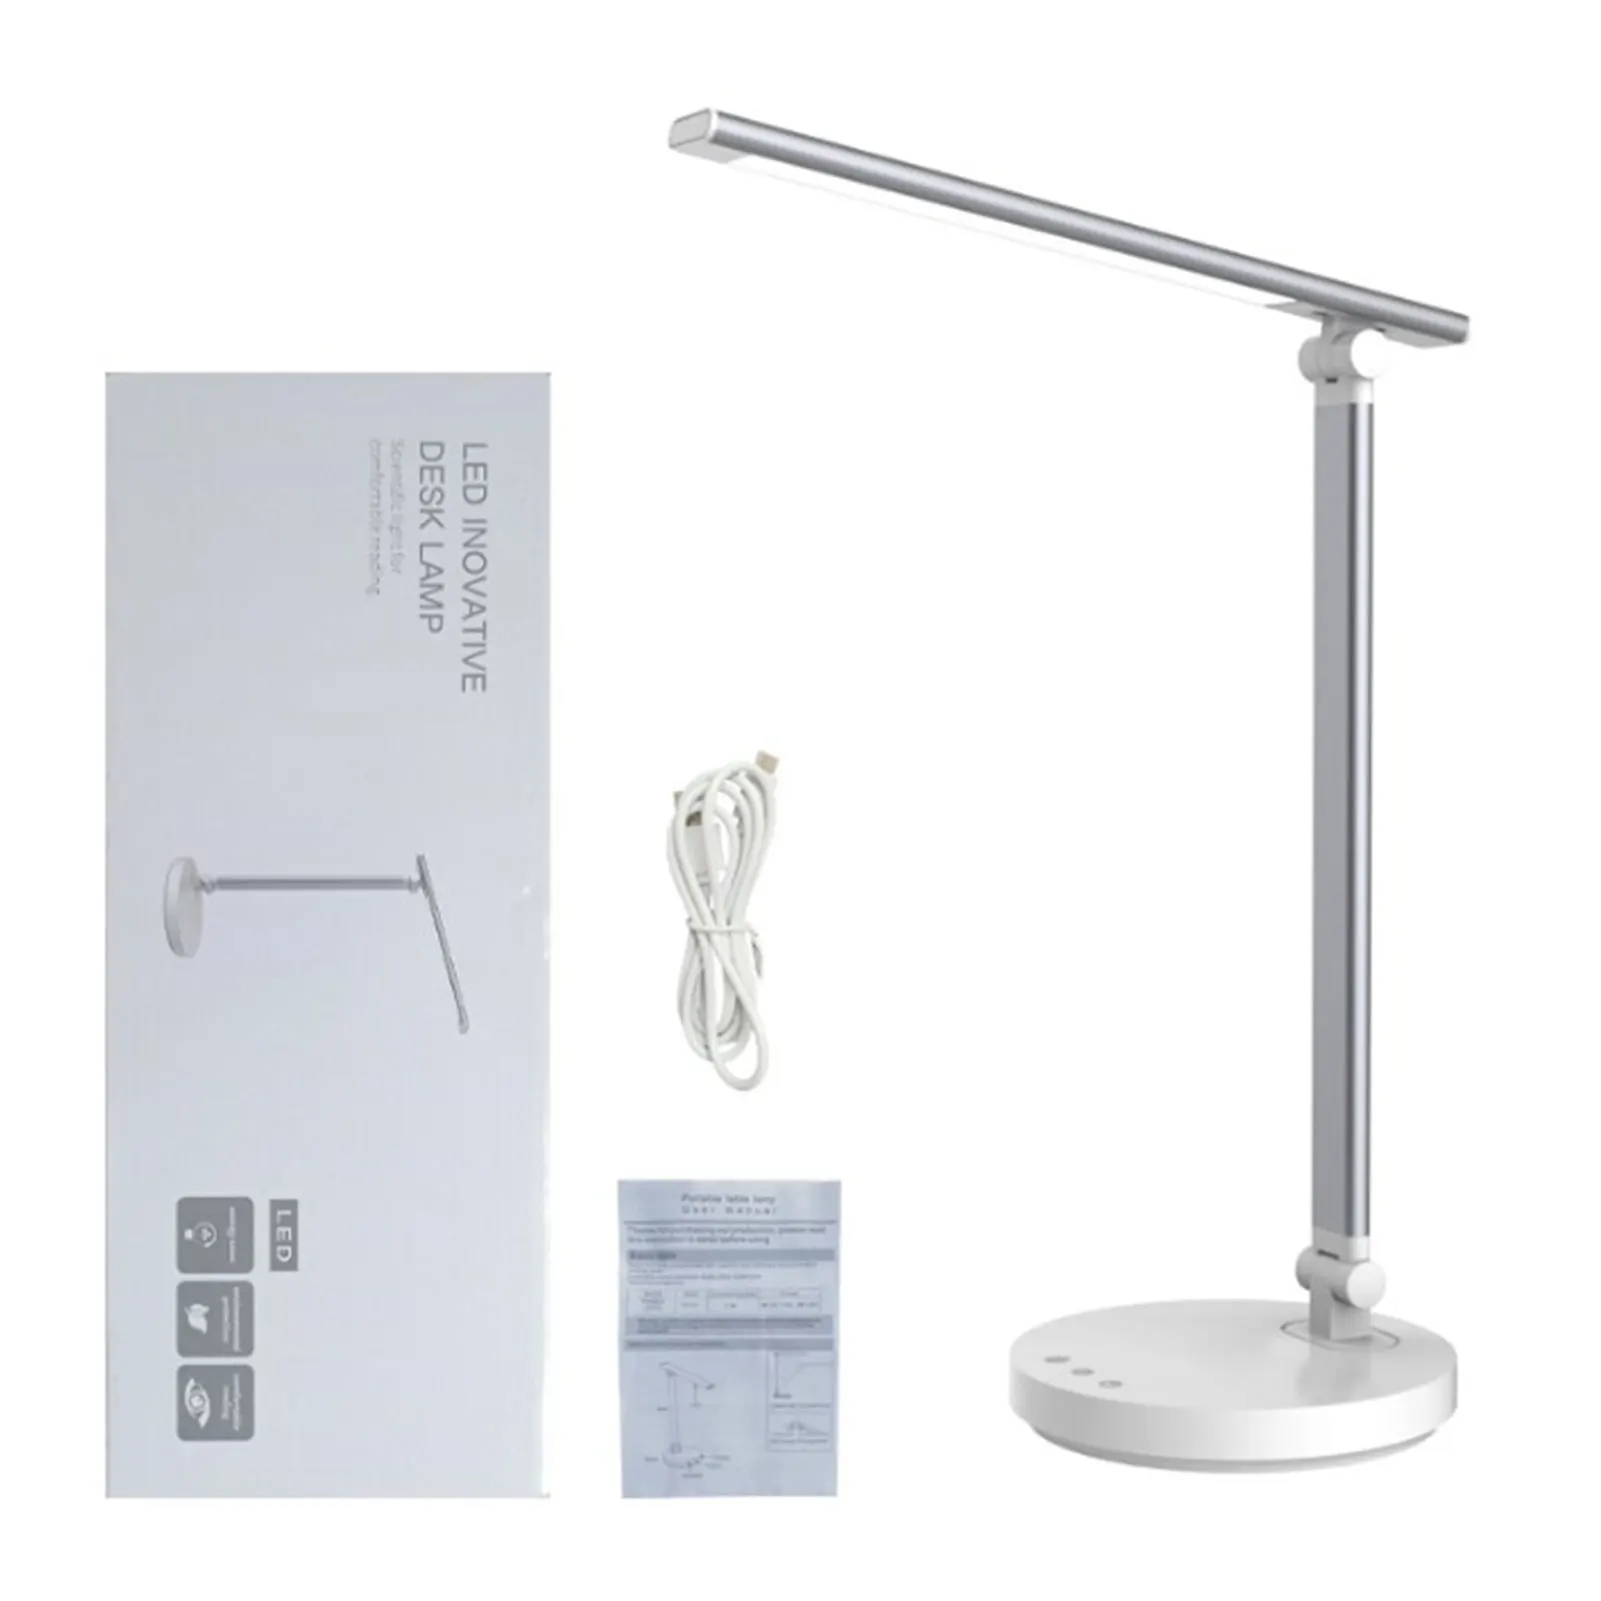 

Kids Studying Office 5 Lighting Modes Dimmable Eye Caring Sleeping Led Timer Home Desk Lamp USB Powered Touch Control